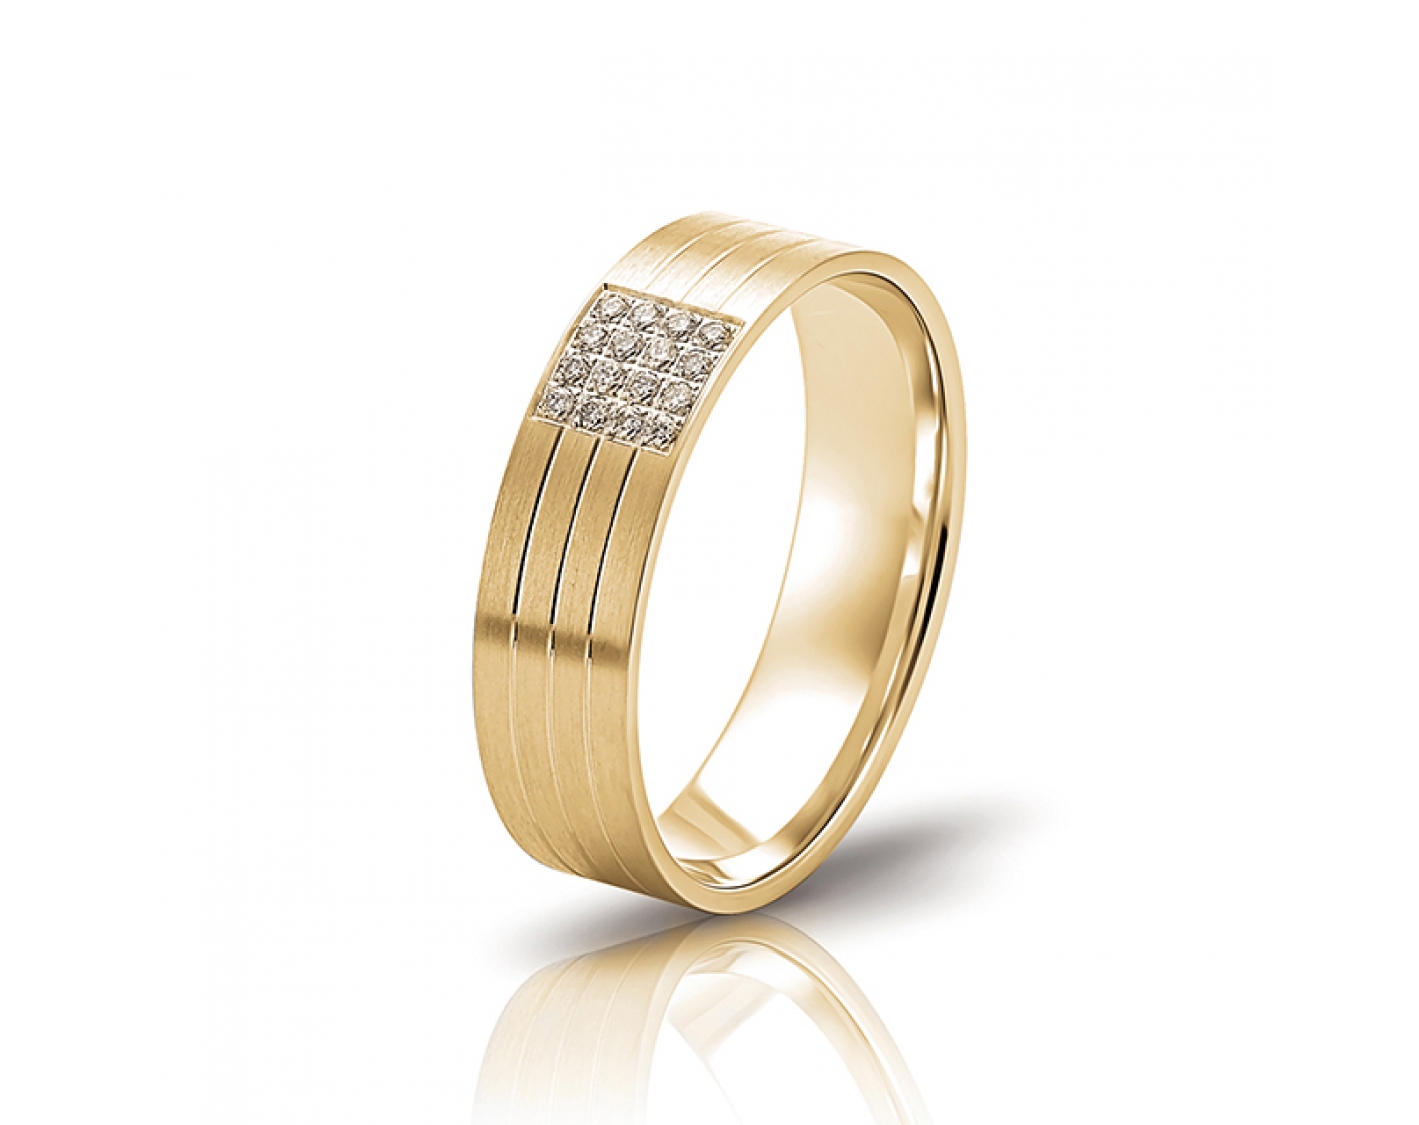 18k yellow gold 6mm matte wedding band with diamonds and inlays Photos & images